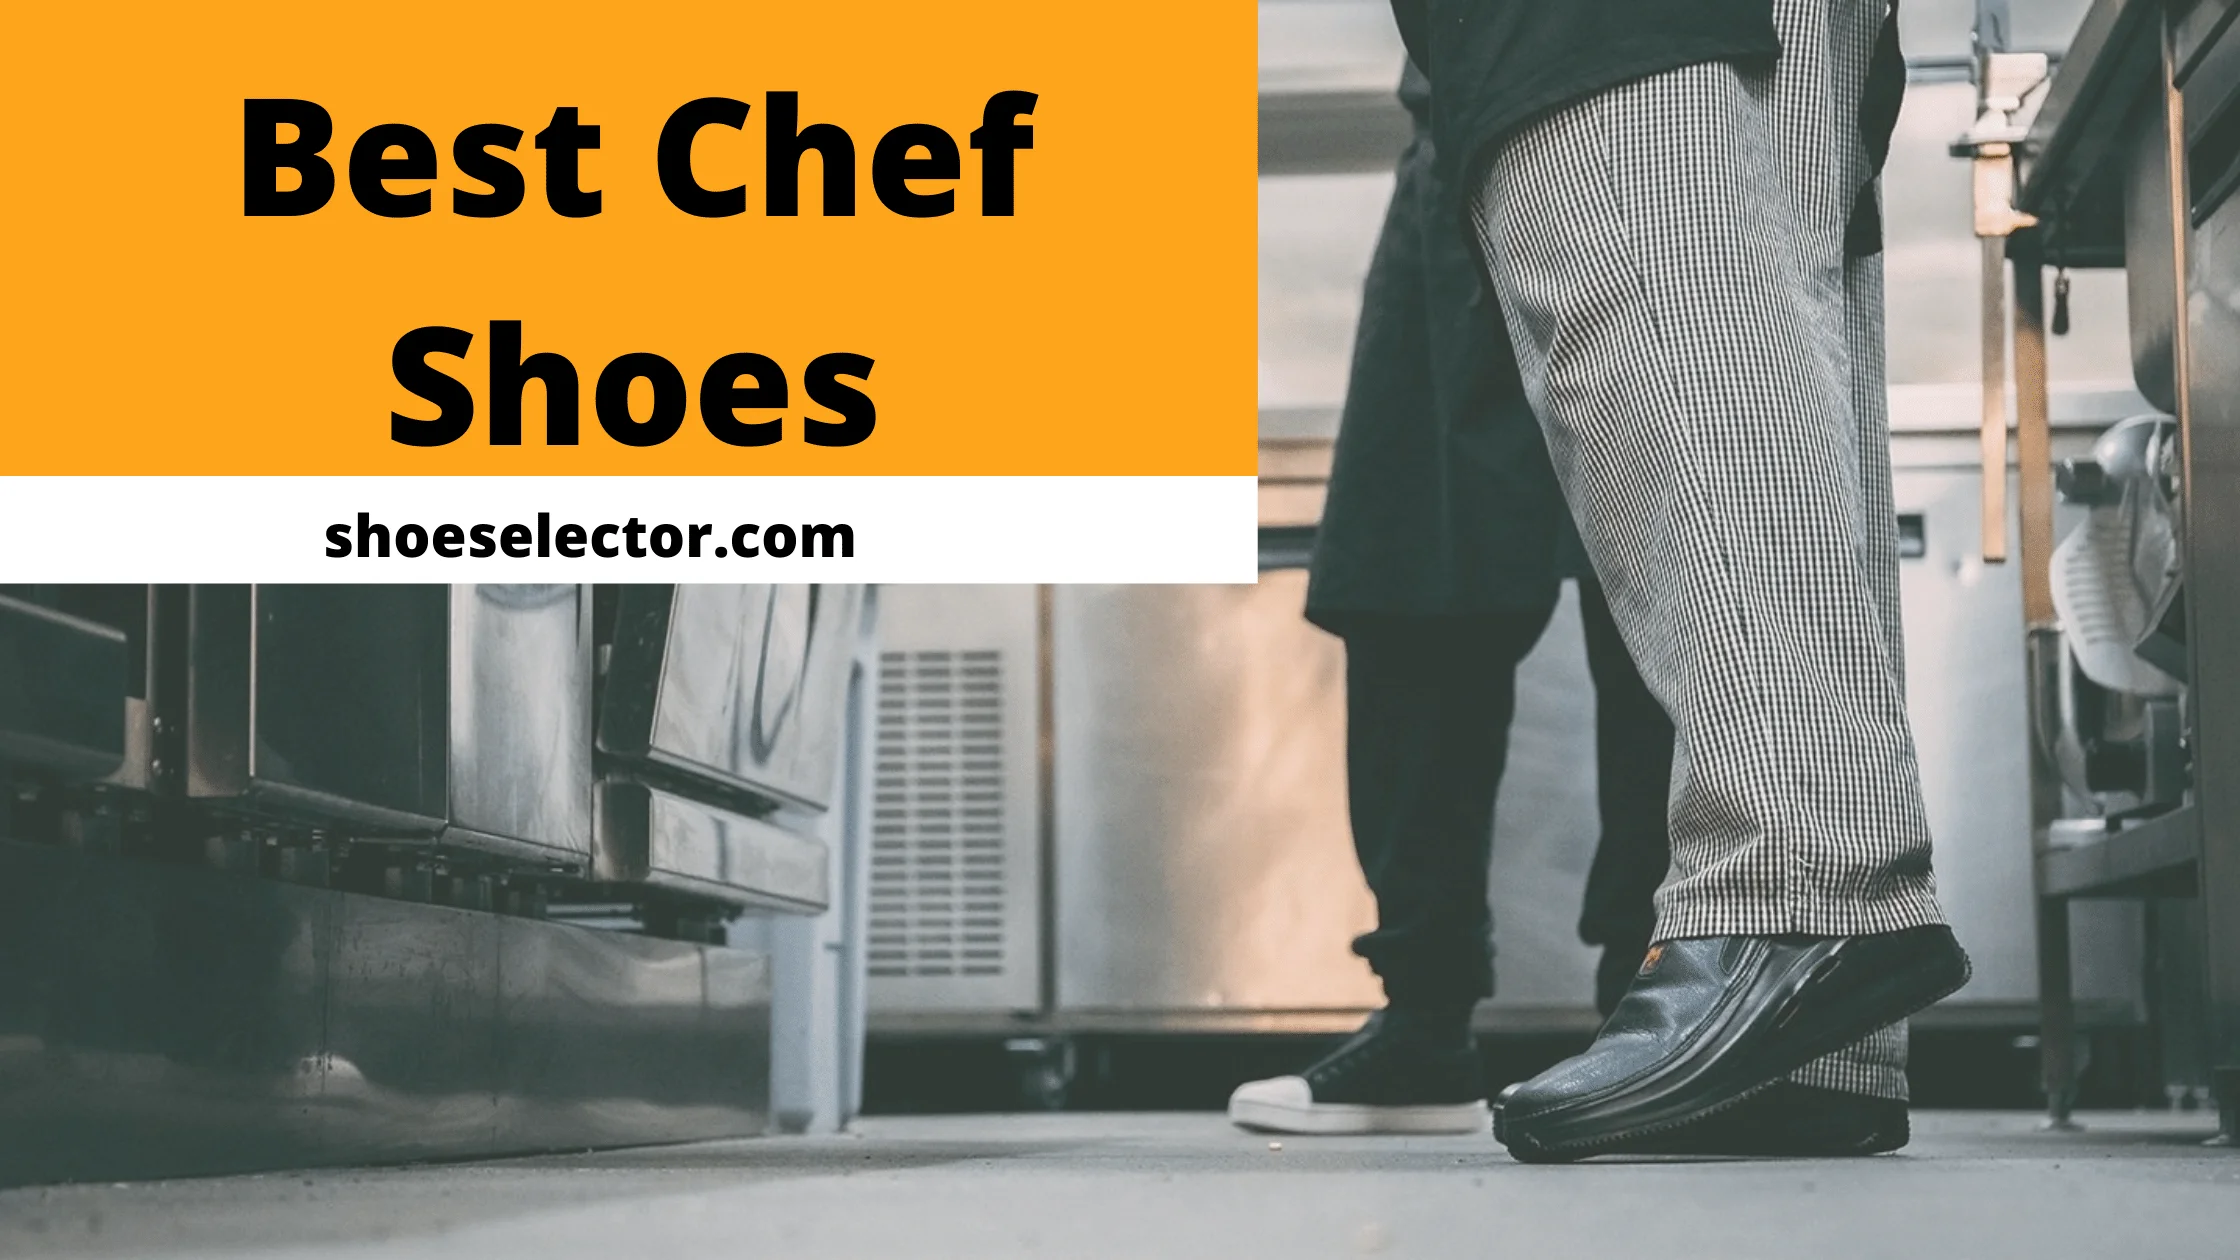 Best Chef Shoes - Recommended Guide By Experts